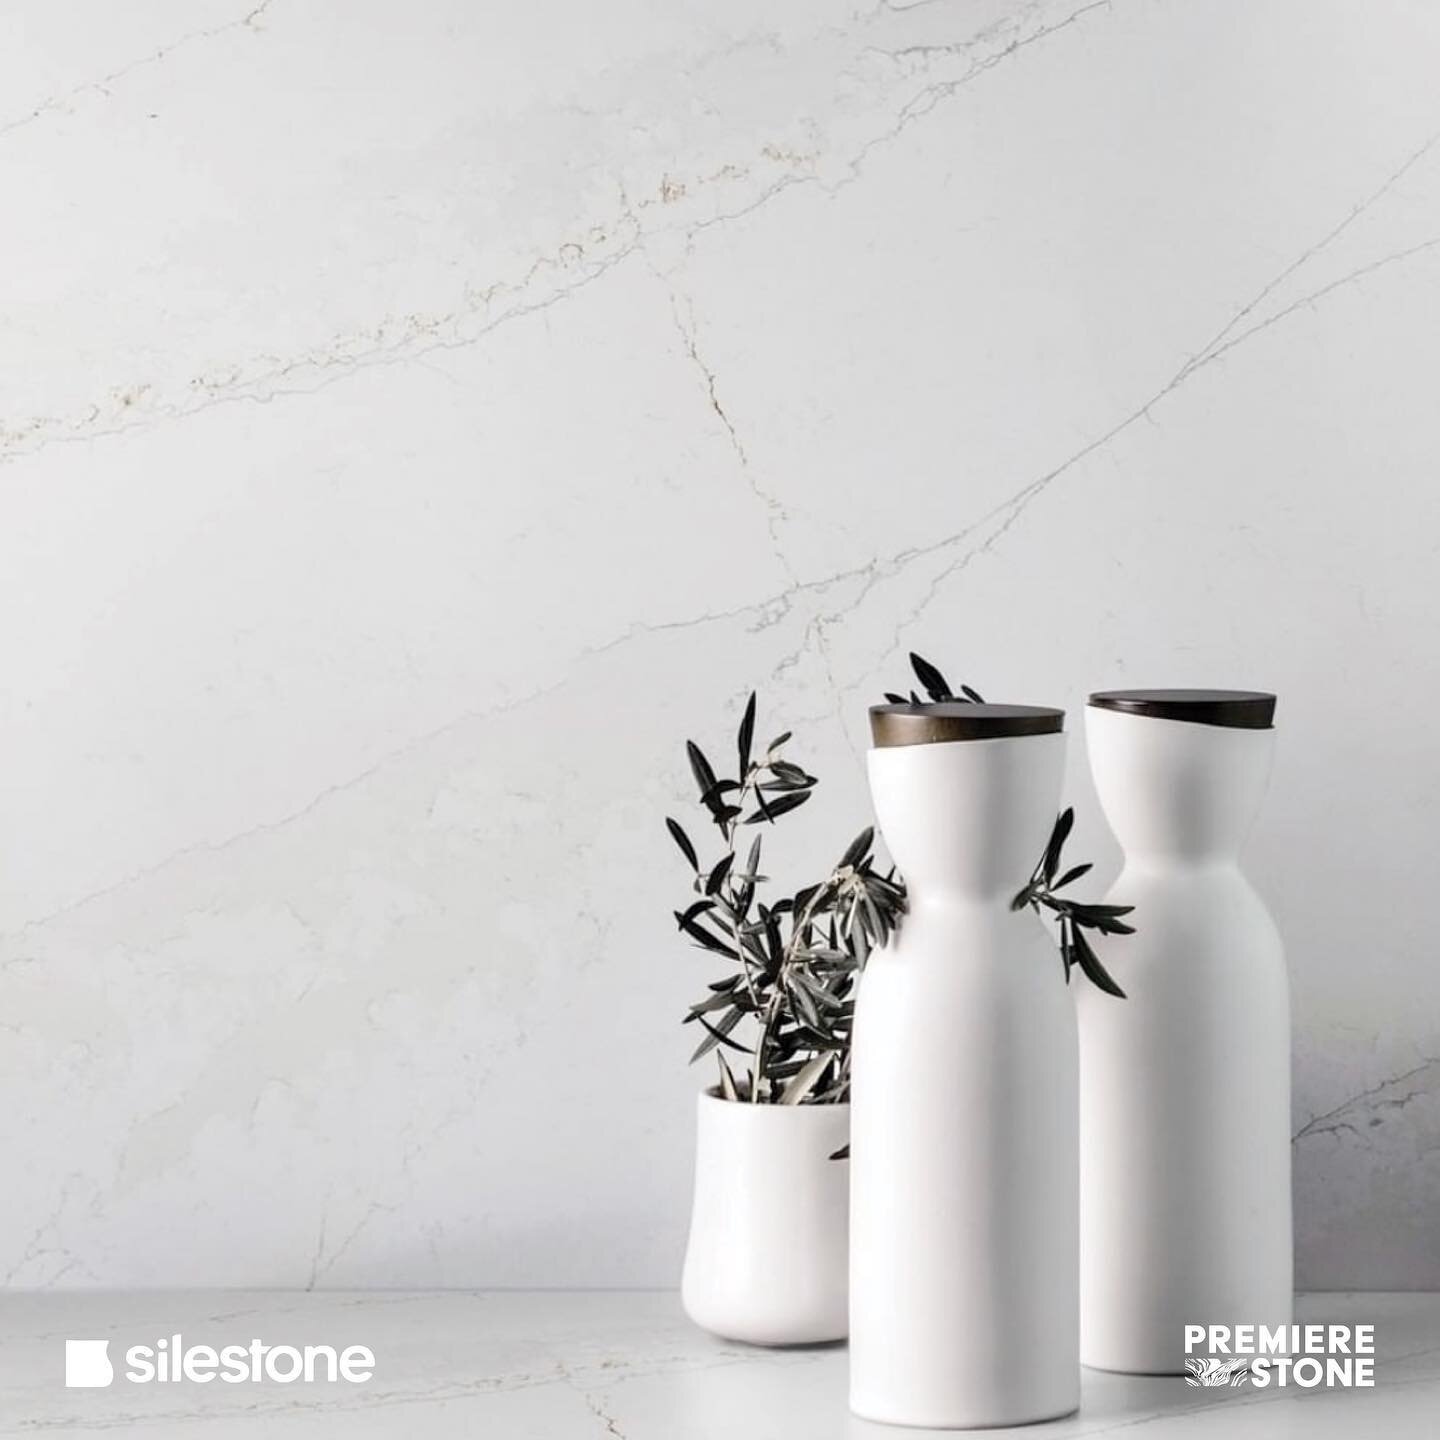 The gold and grey shades of Silestone Ethereal Glow subtly blend into its luminescent white canvas, helping you create calm, tranquil spaces within your home.

View our full range of natural and engineered stone suppliers by visiting us at premierest